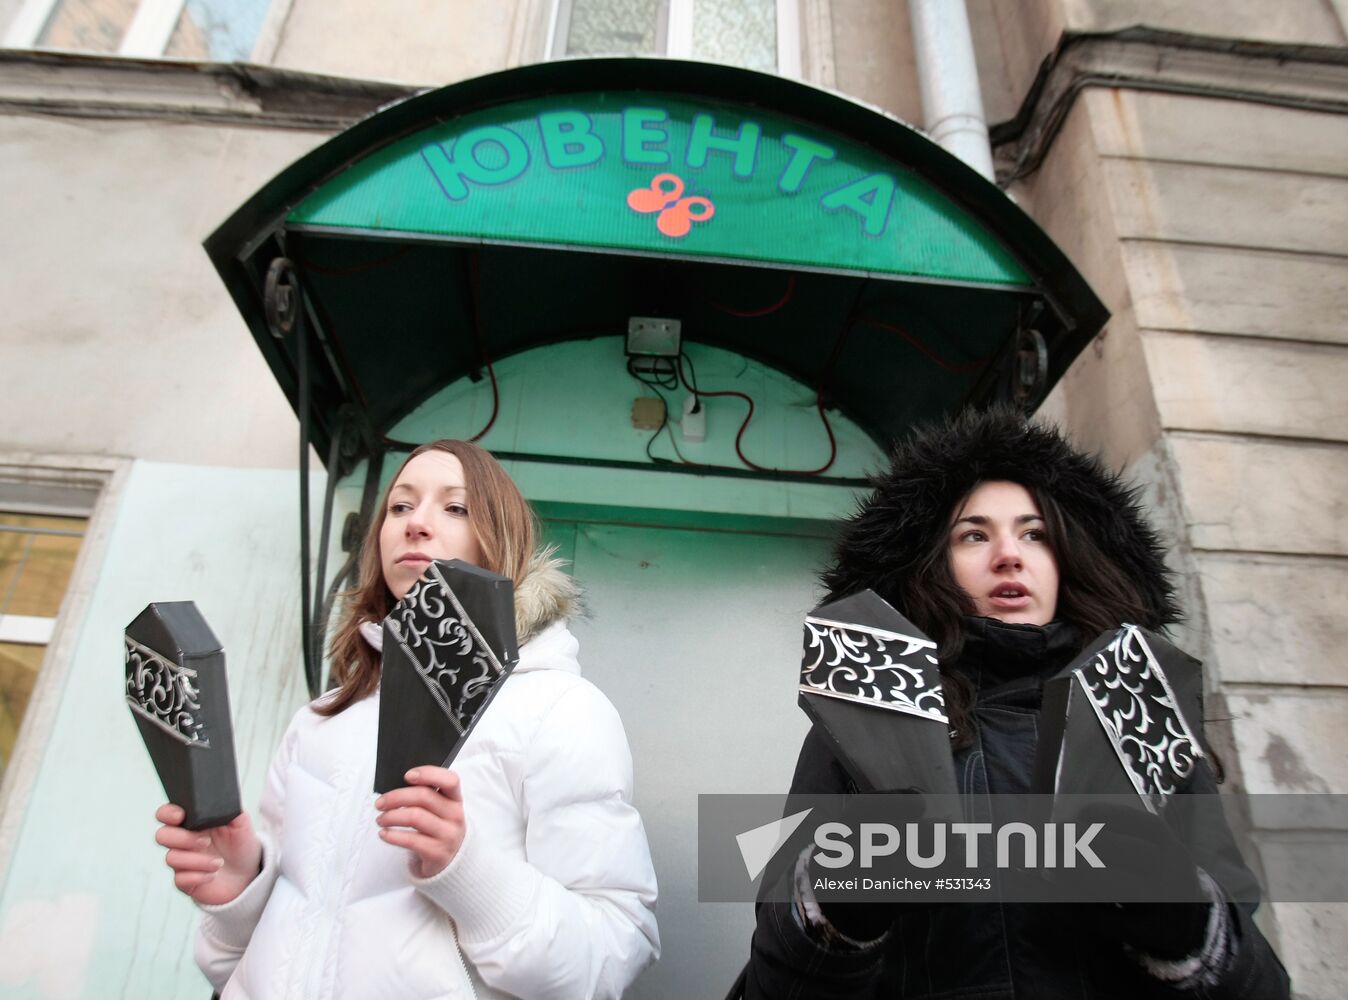 Anti-abortion rally in St Petersburg